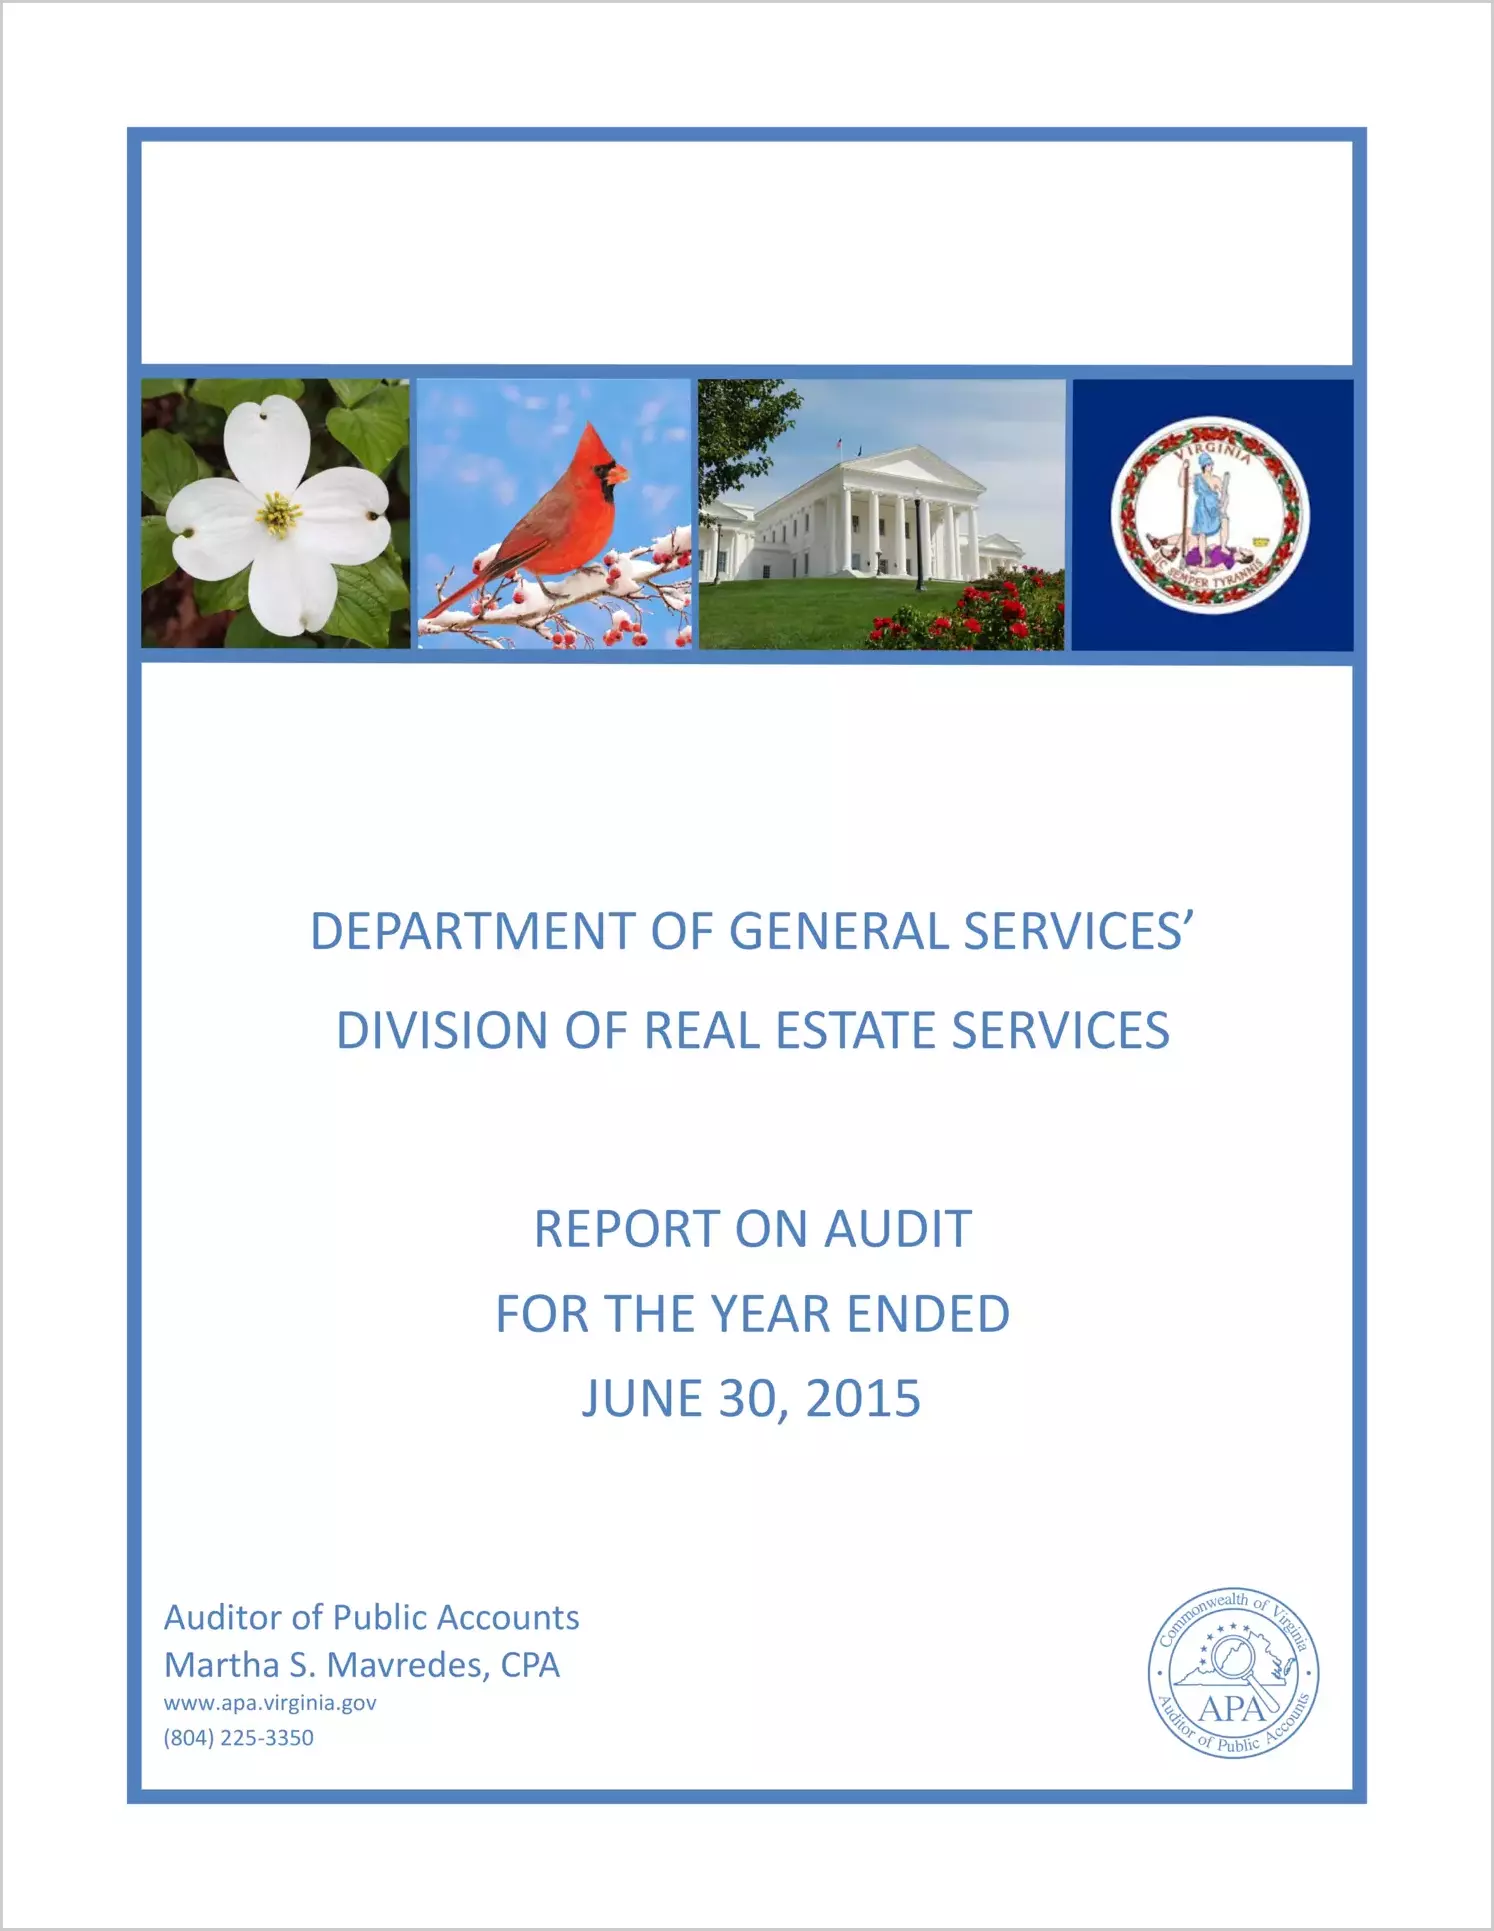 Department of General Service's Division of Real Estate Services for the year ended June 30, 2015